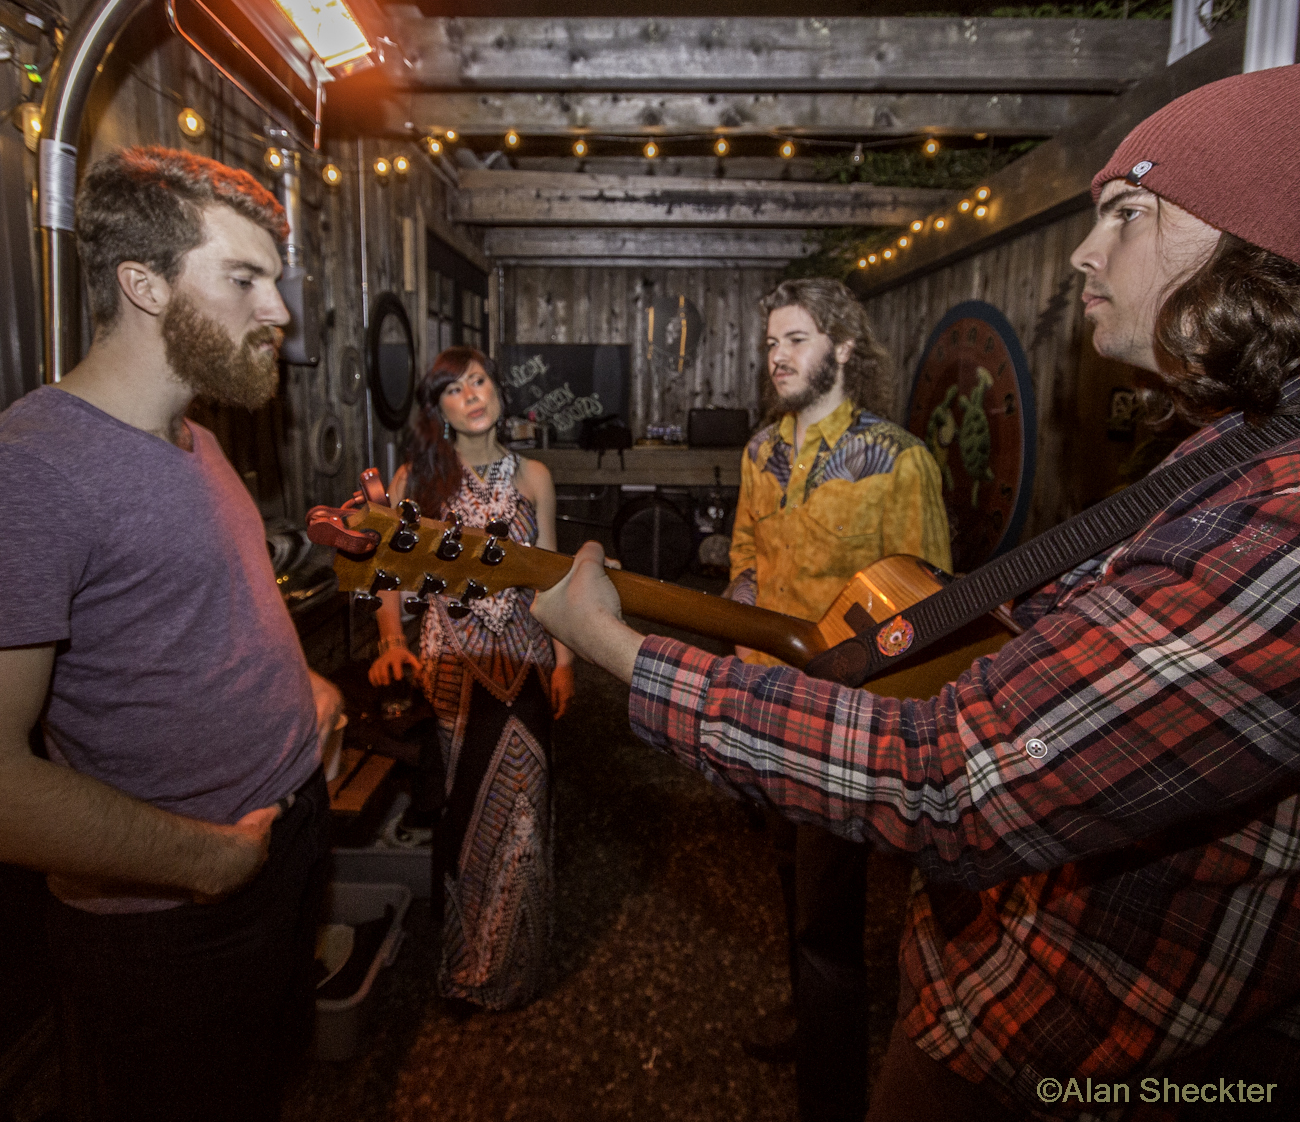 Midnight North readying for their performance in the Grate Room, from left: Grahame Lesh, Elliott Peck, Alex Jordan, Alex Koford, January 29, 2016